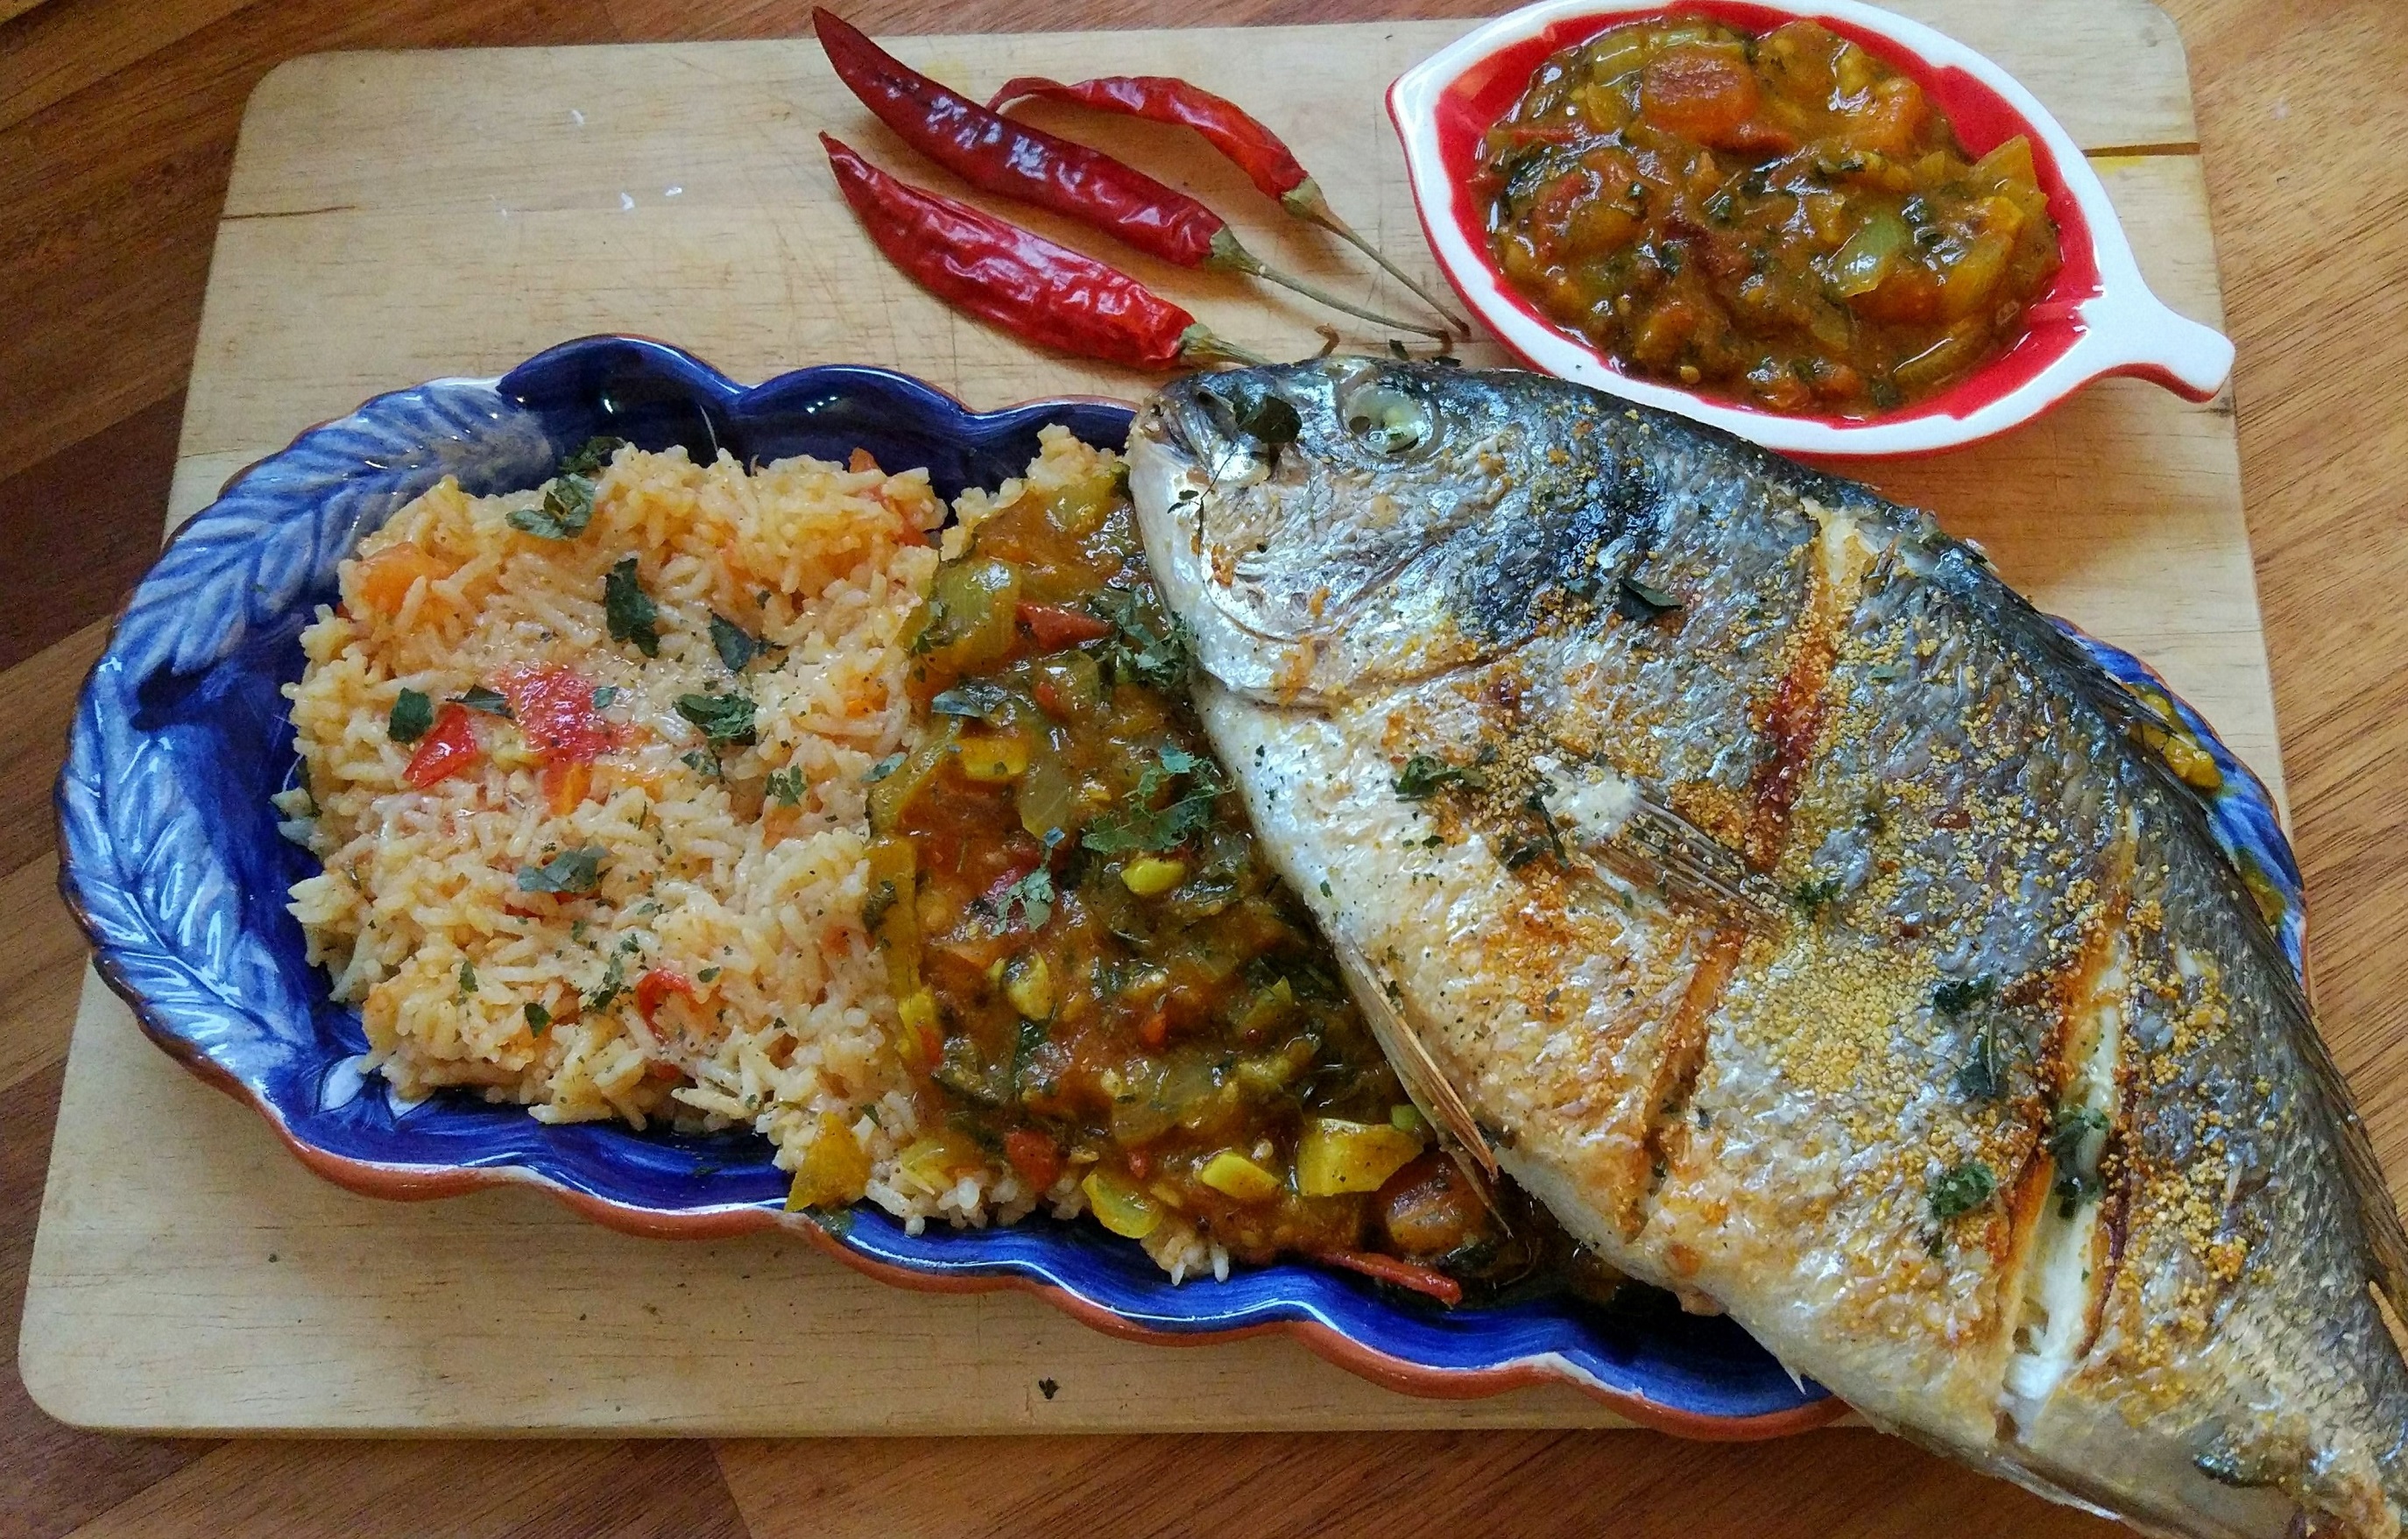 Fried Dorado with Portuguese tomato rice and Indian fish curry